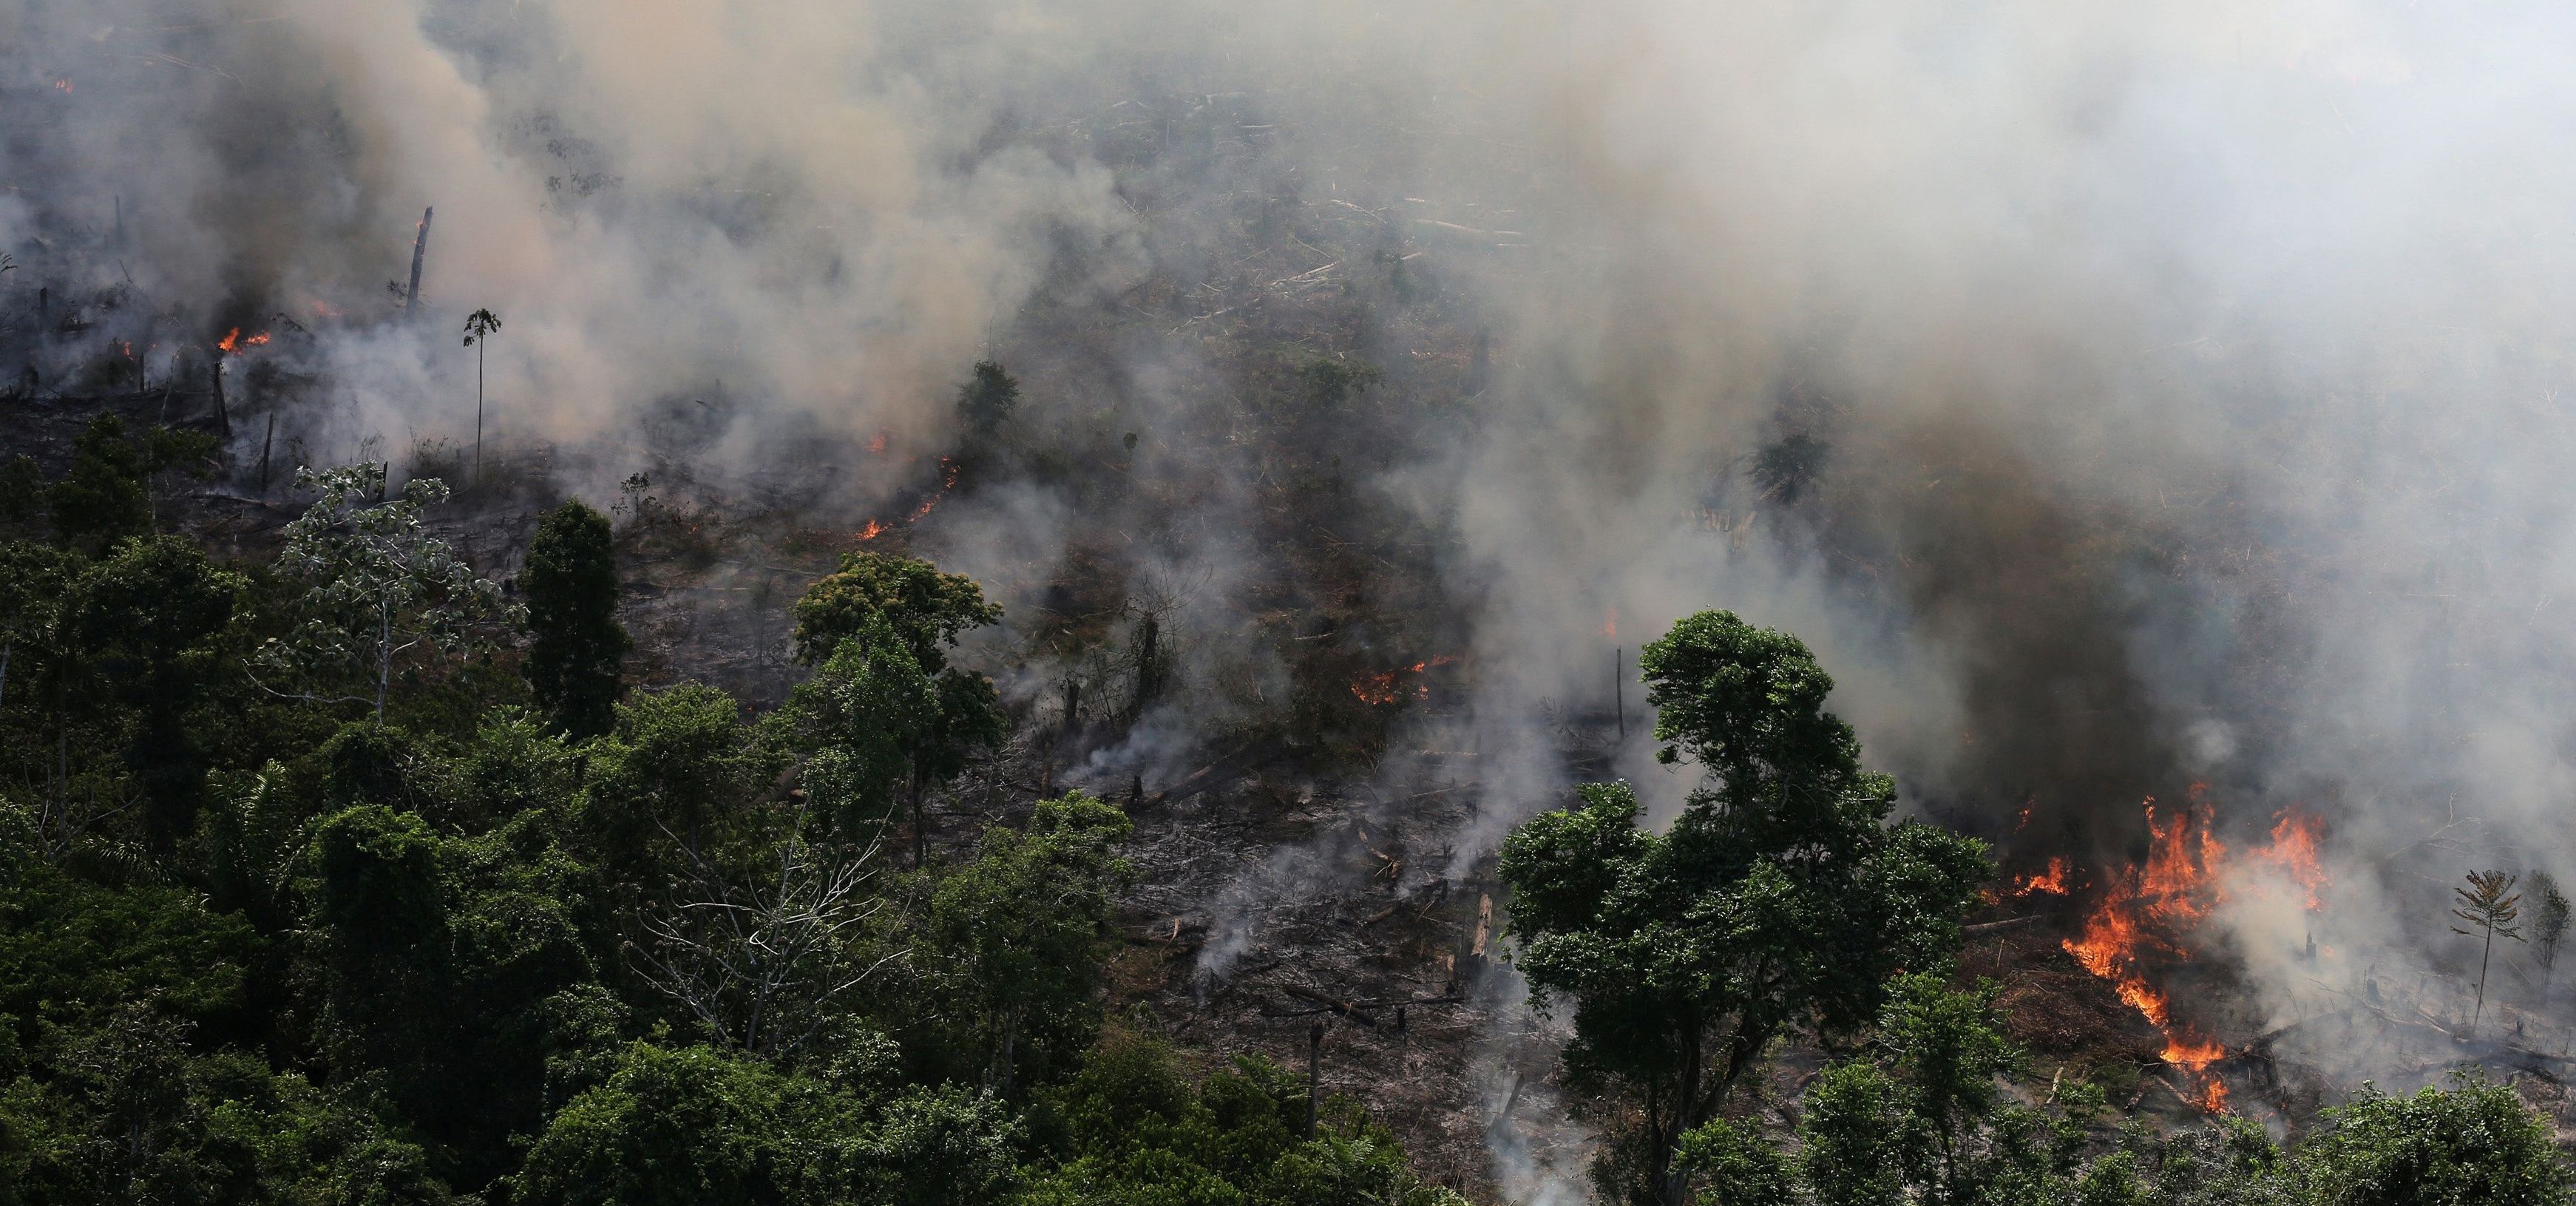 Amazon The Fire In World's Largest Rainforest Is So Huge That It's